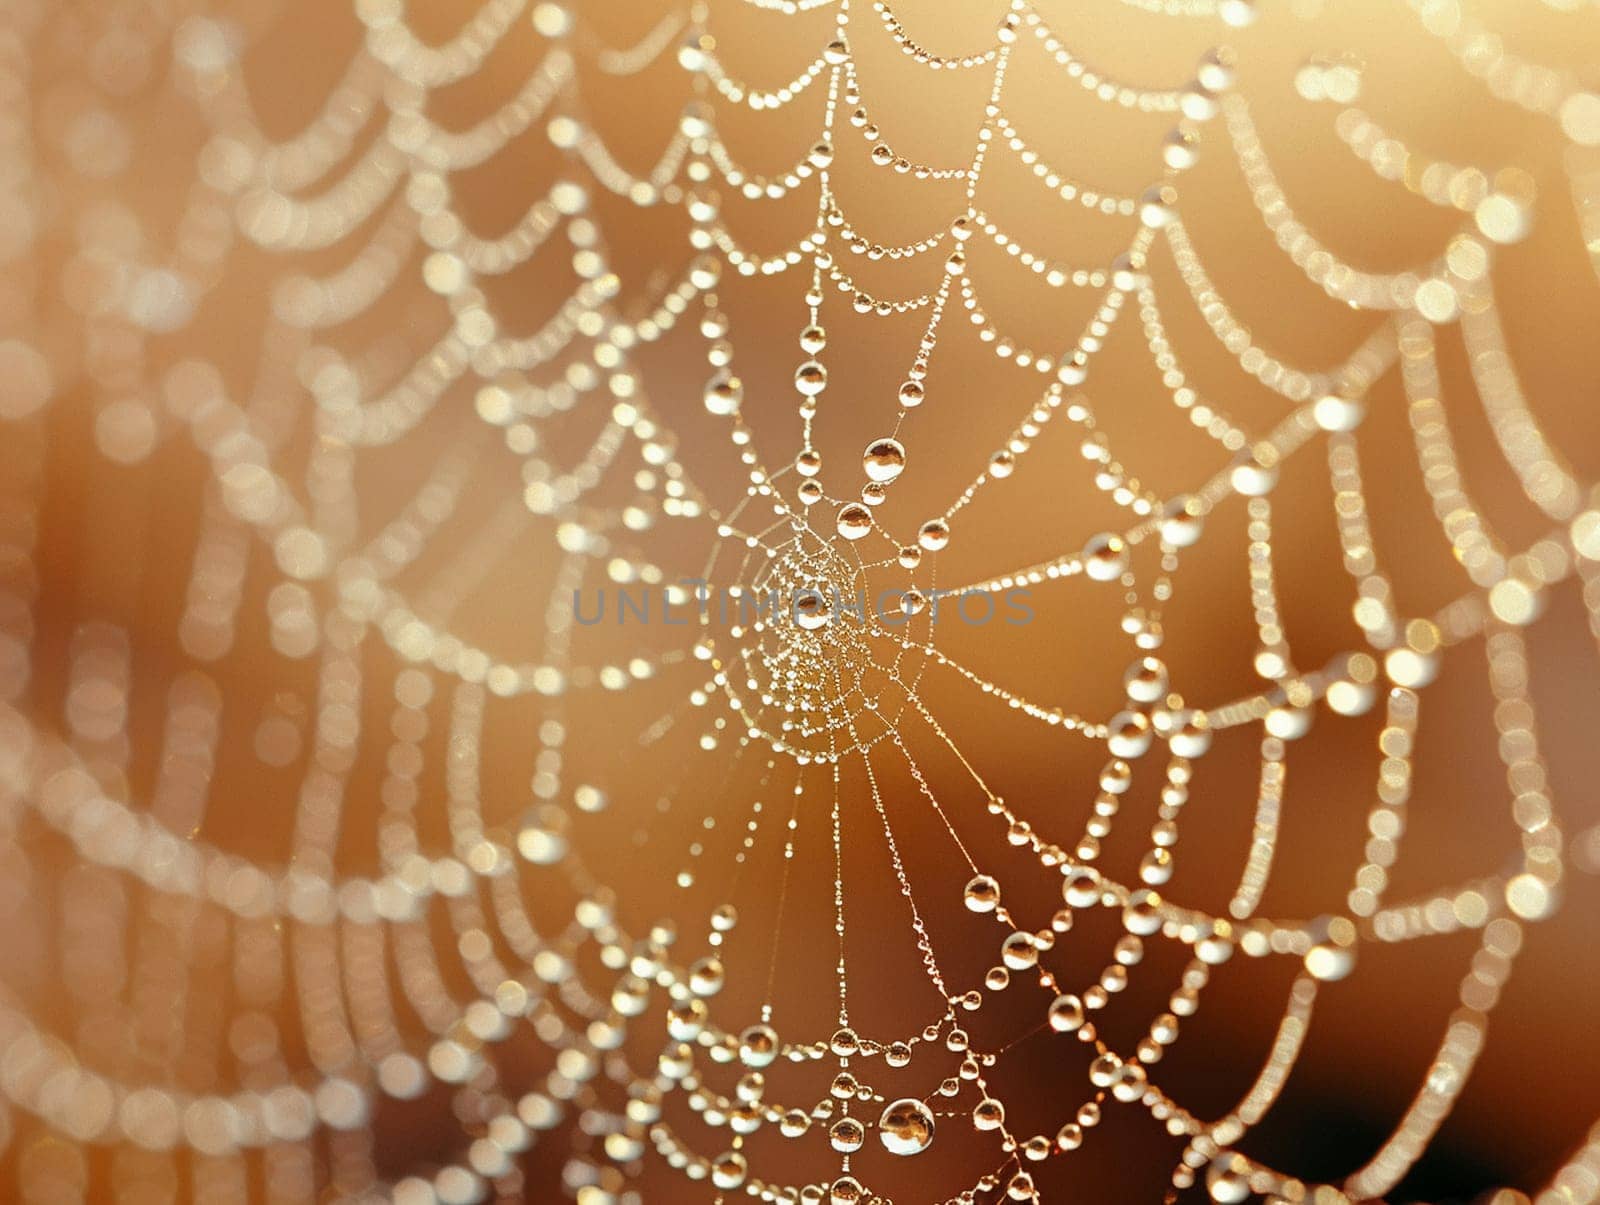 Water droplets on a spider web, surface illustration capturing the delicate balance and beauty of nature.